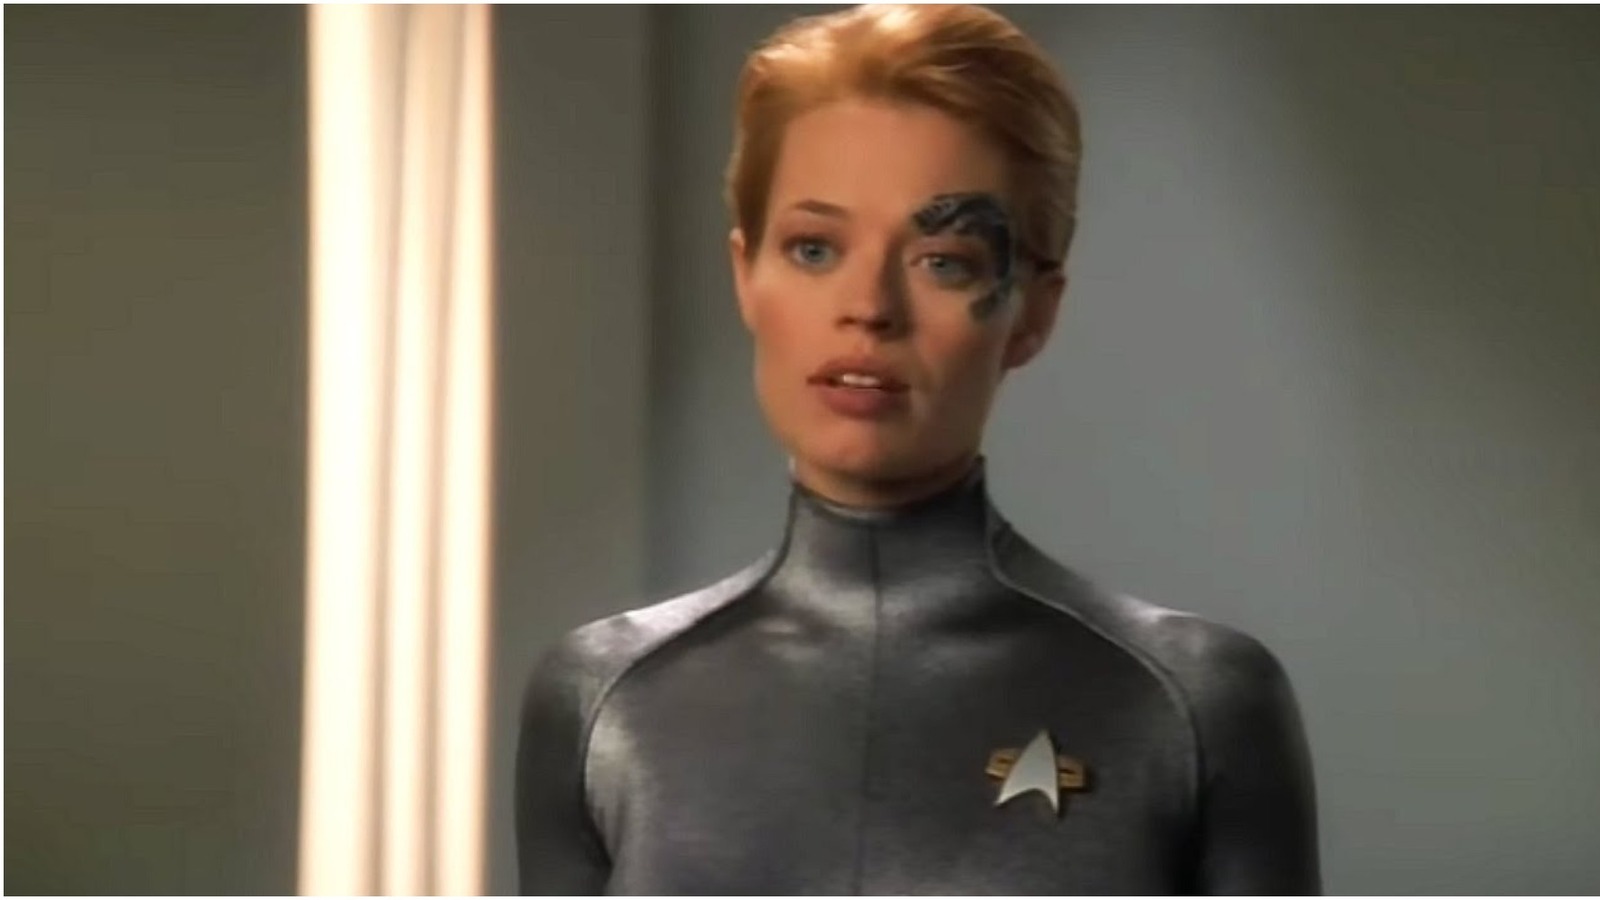 when did 7 join voyager